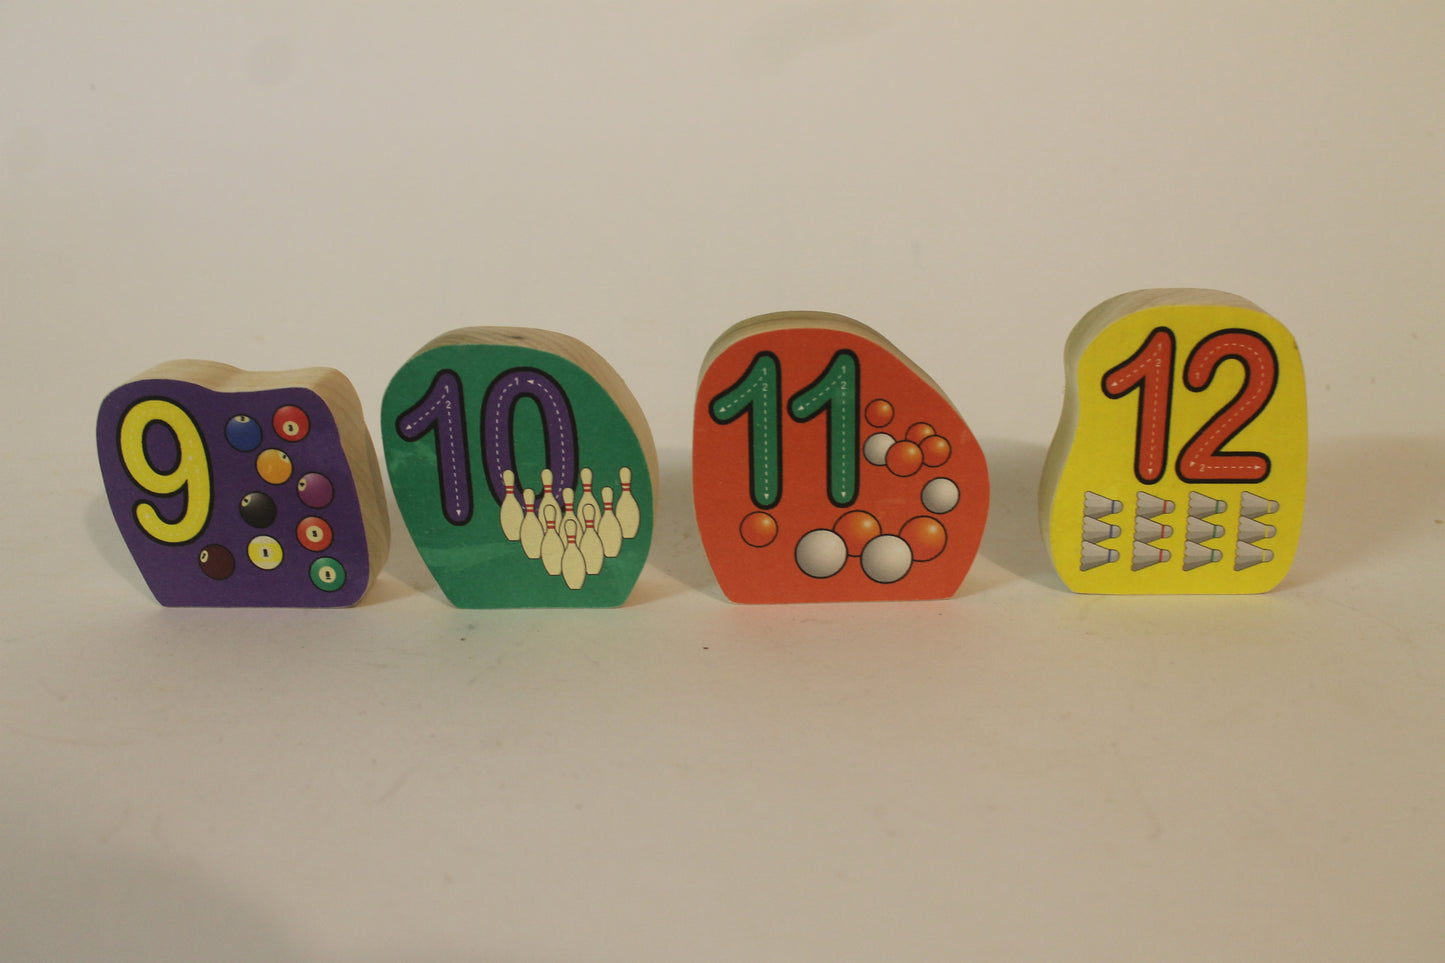 Child's set of blocks for learning numbers